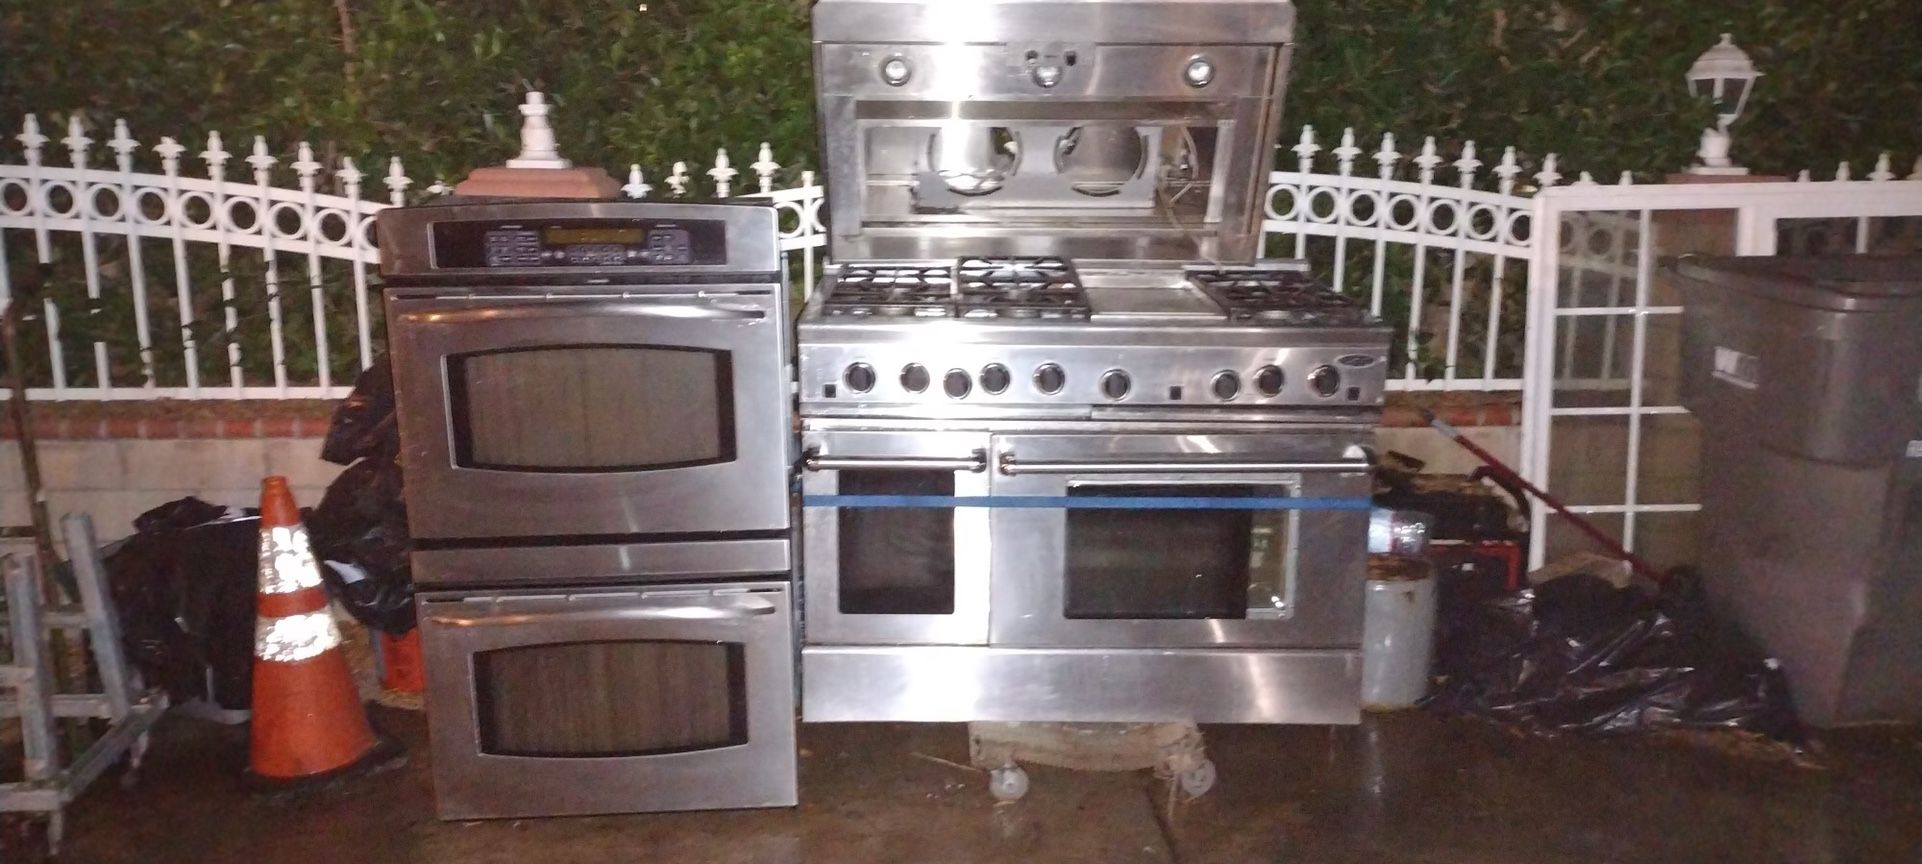 Restaurant Style Stove Oven And Hood!